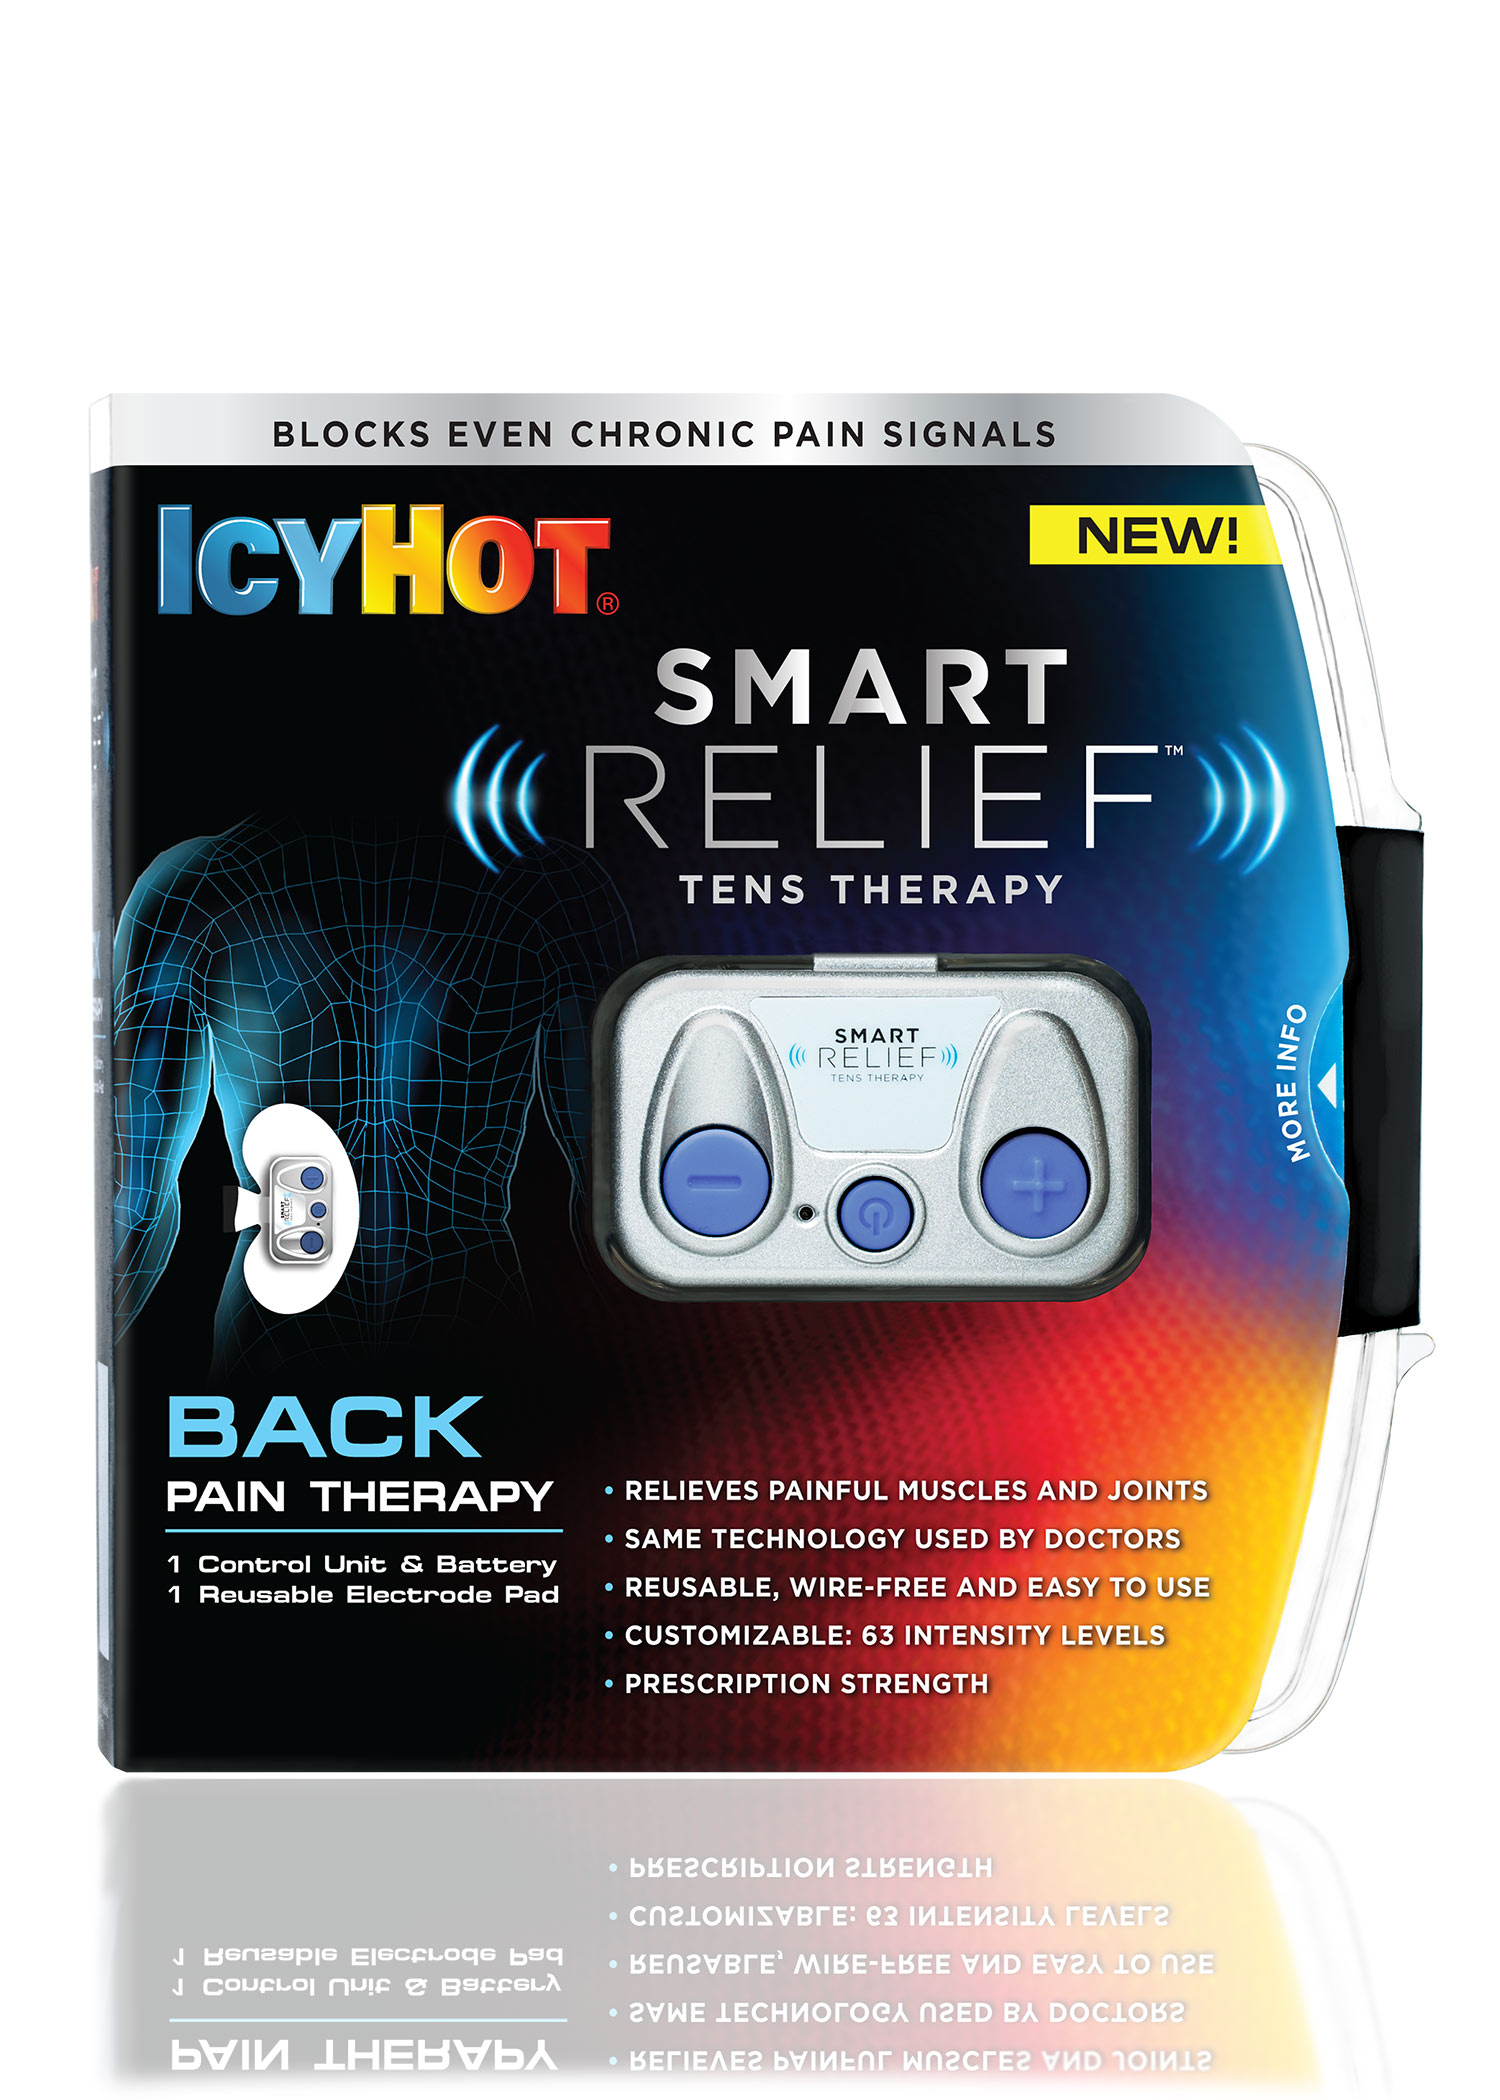 IcyHot SmartRelief Product Image.